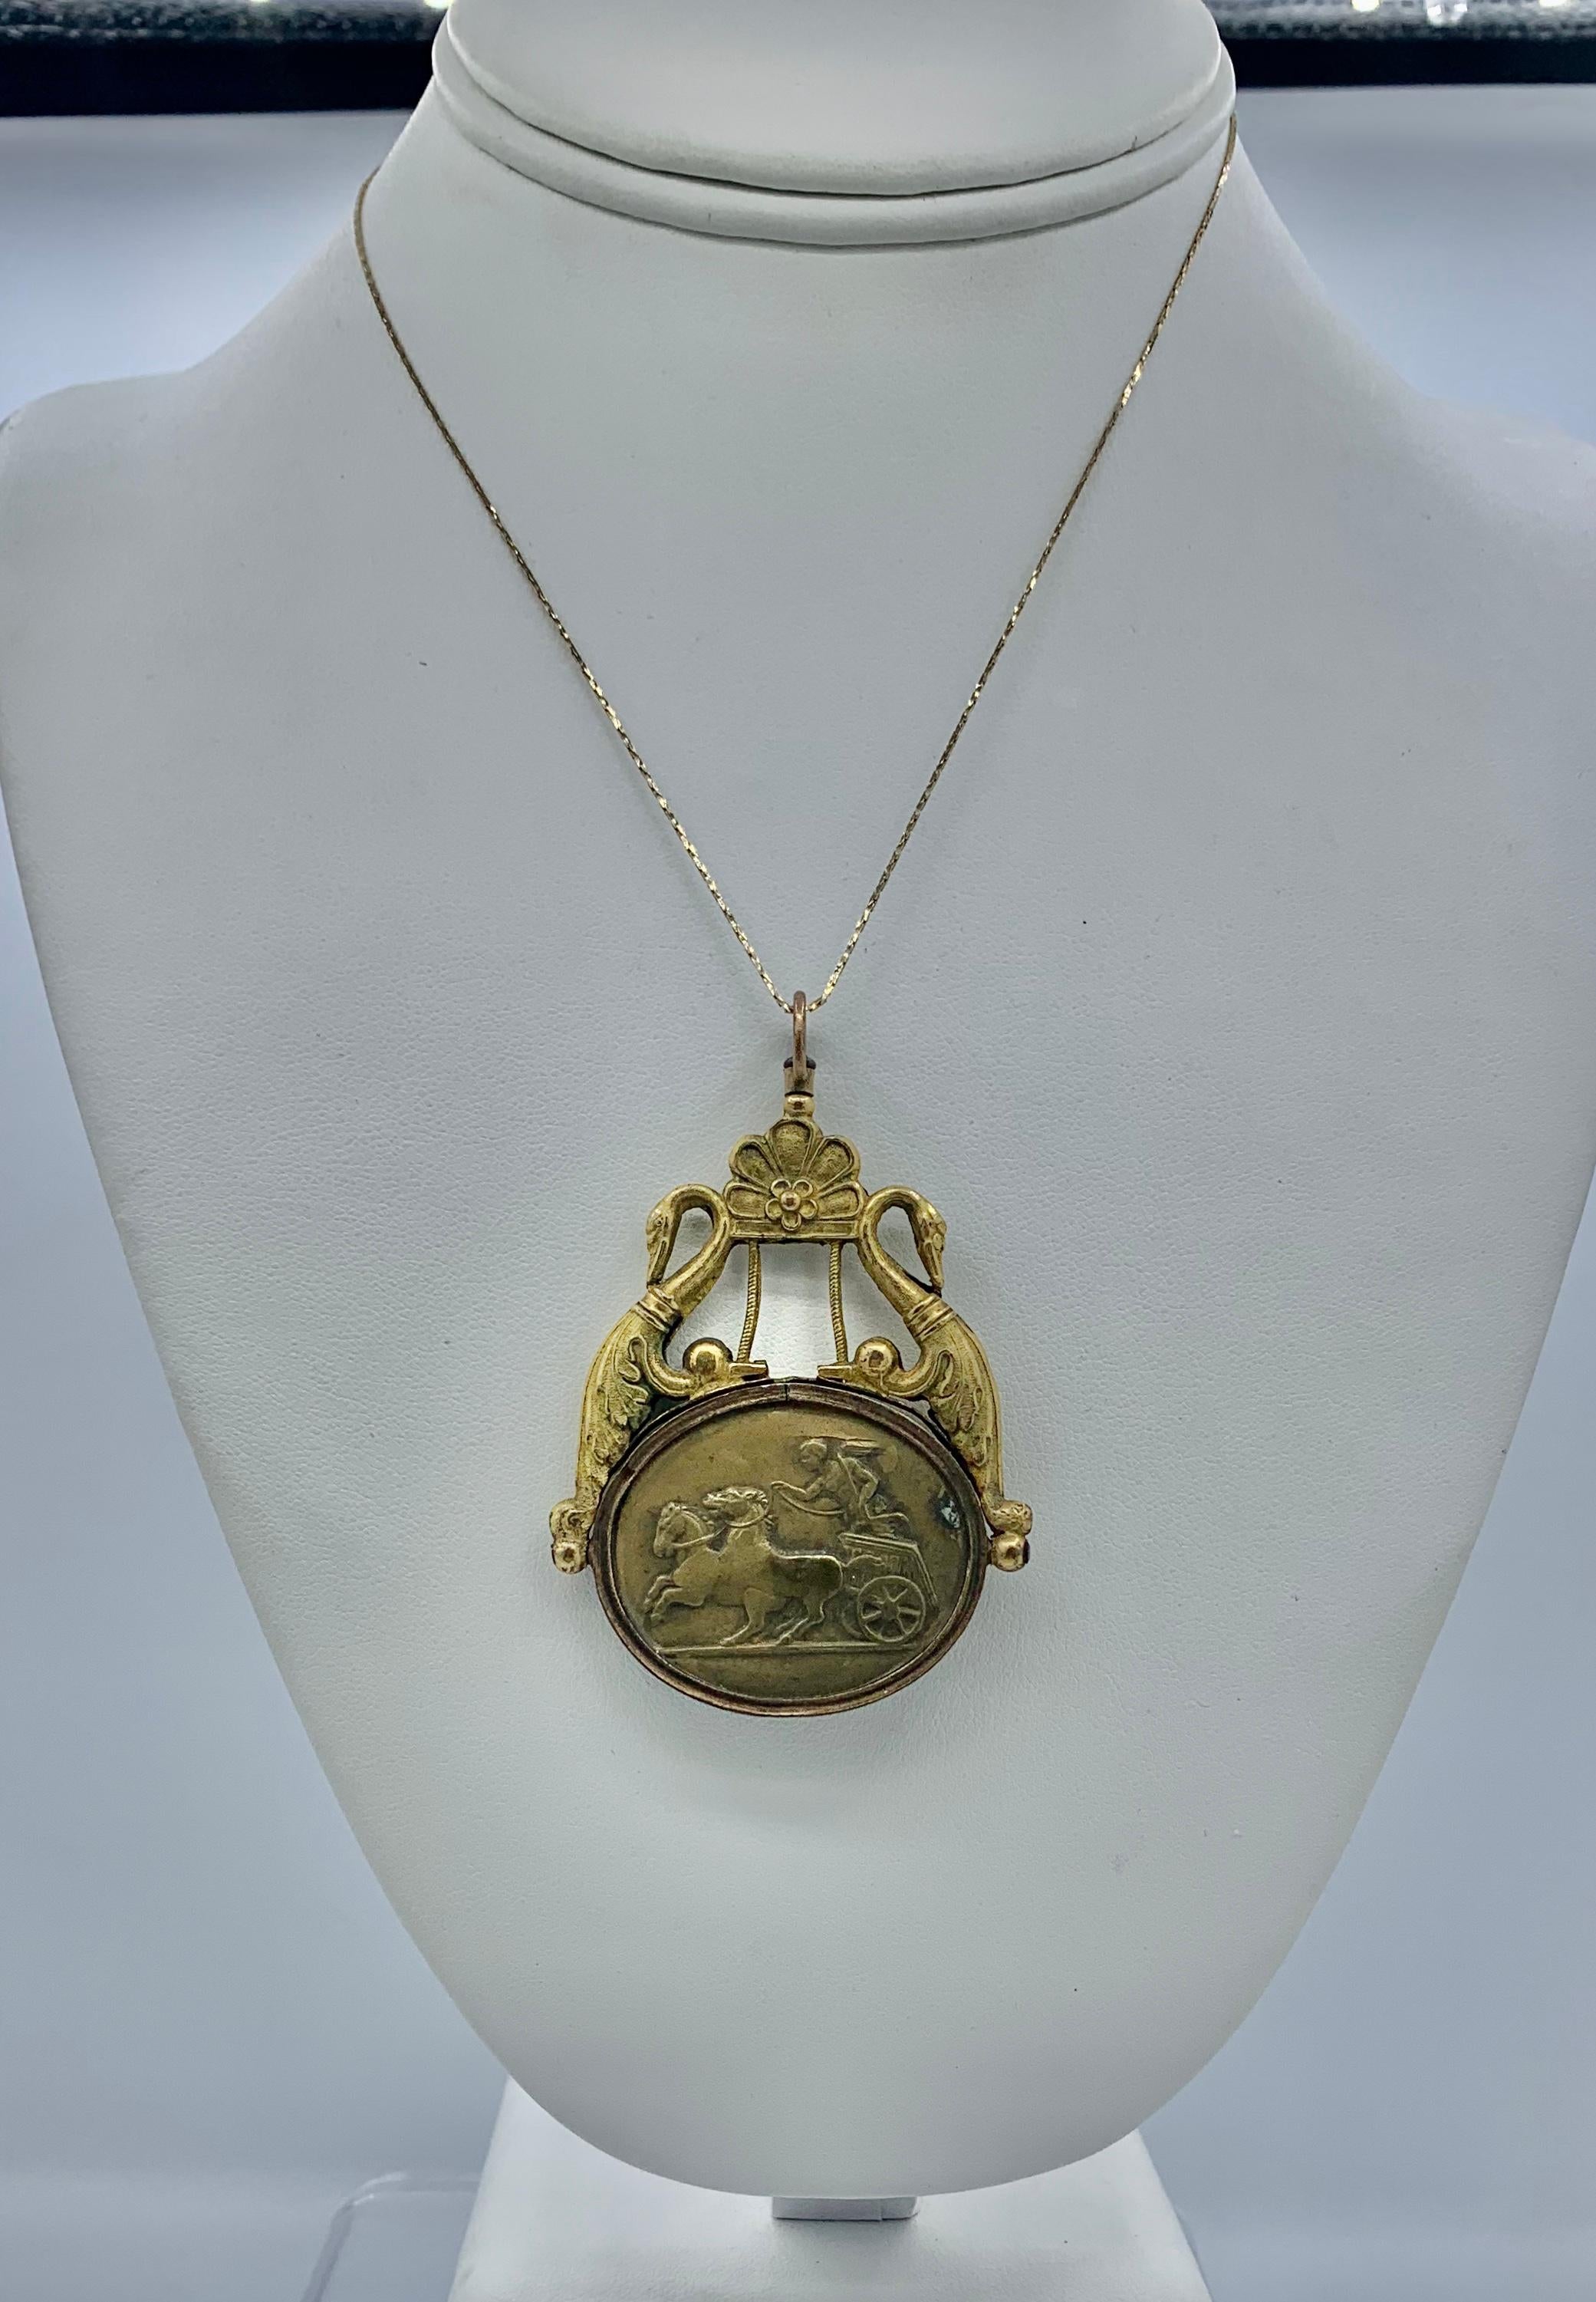 This is a magnificent rare early pendant with a bronze medallion of an Angel or Cherub riding in a chariot pulled by two horses. The medallion has a gold filled surmount with two swans on either side with acanthus leaf motif wings.  The rare jewel